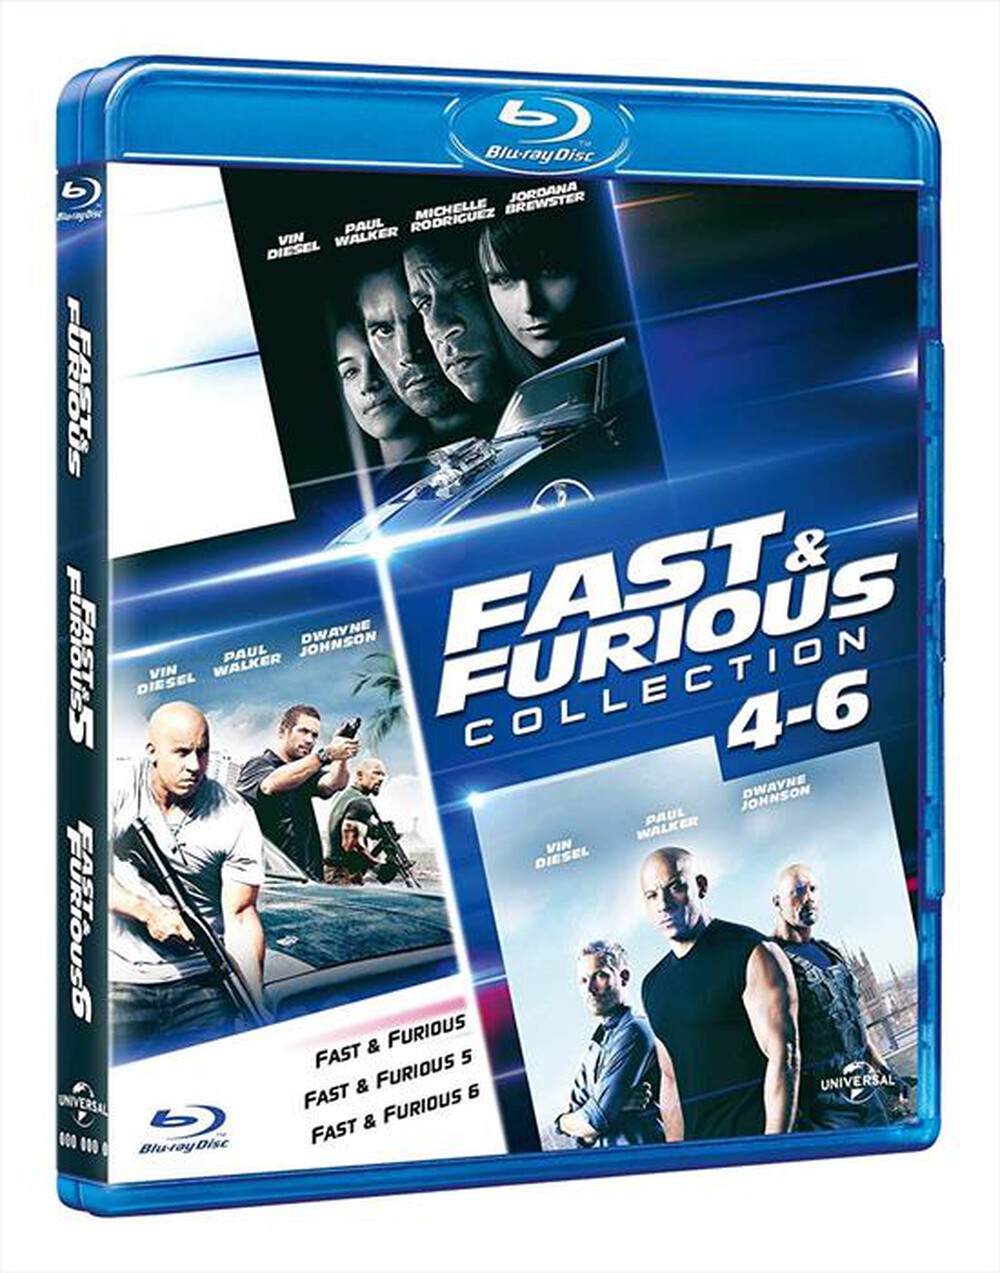 "WARNER HOME VIDEO - Fast & Furious Family Collection (3 Blu-Ray)"